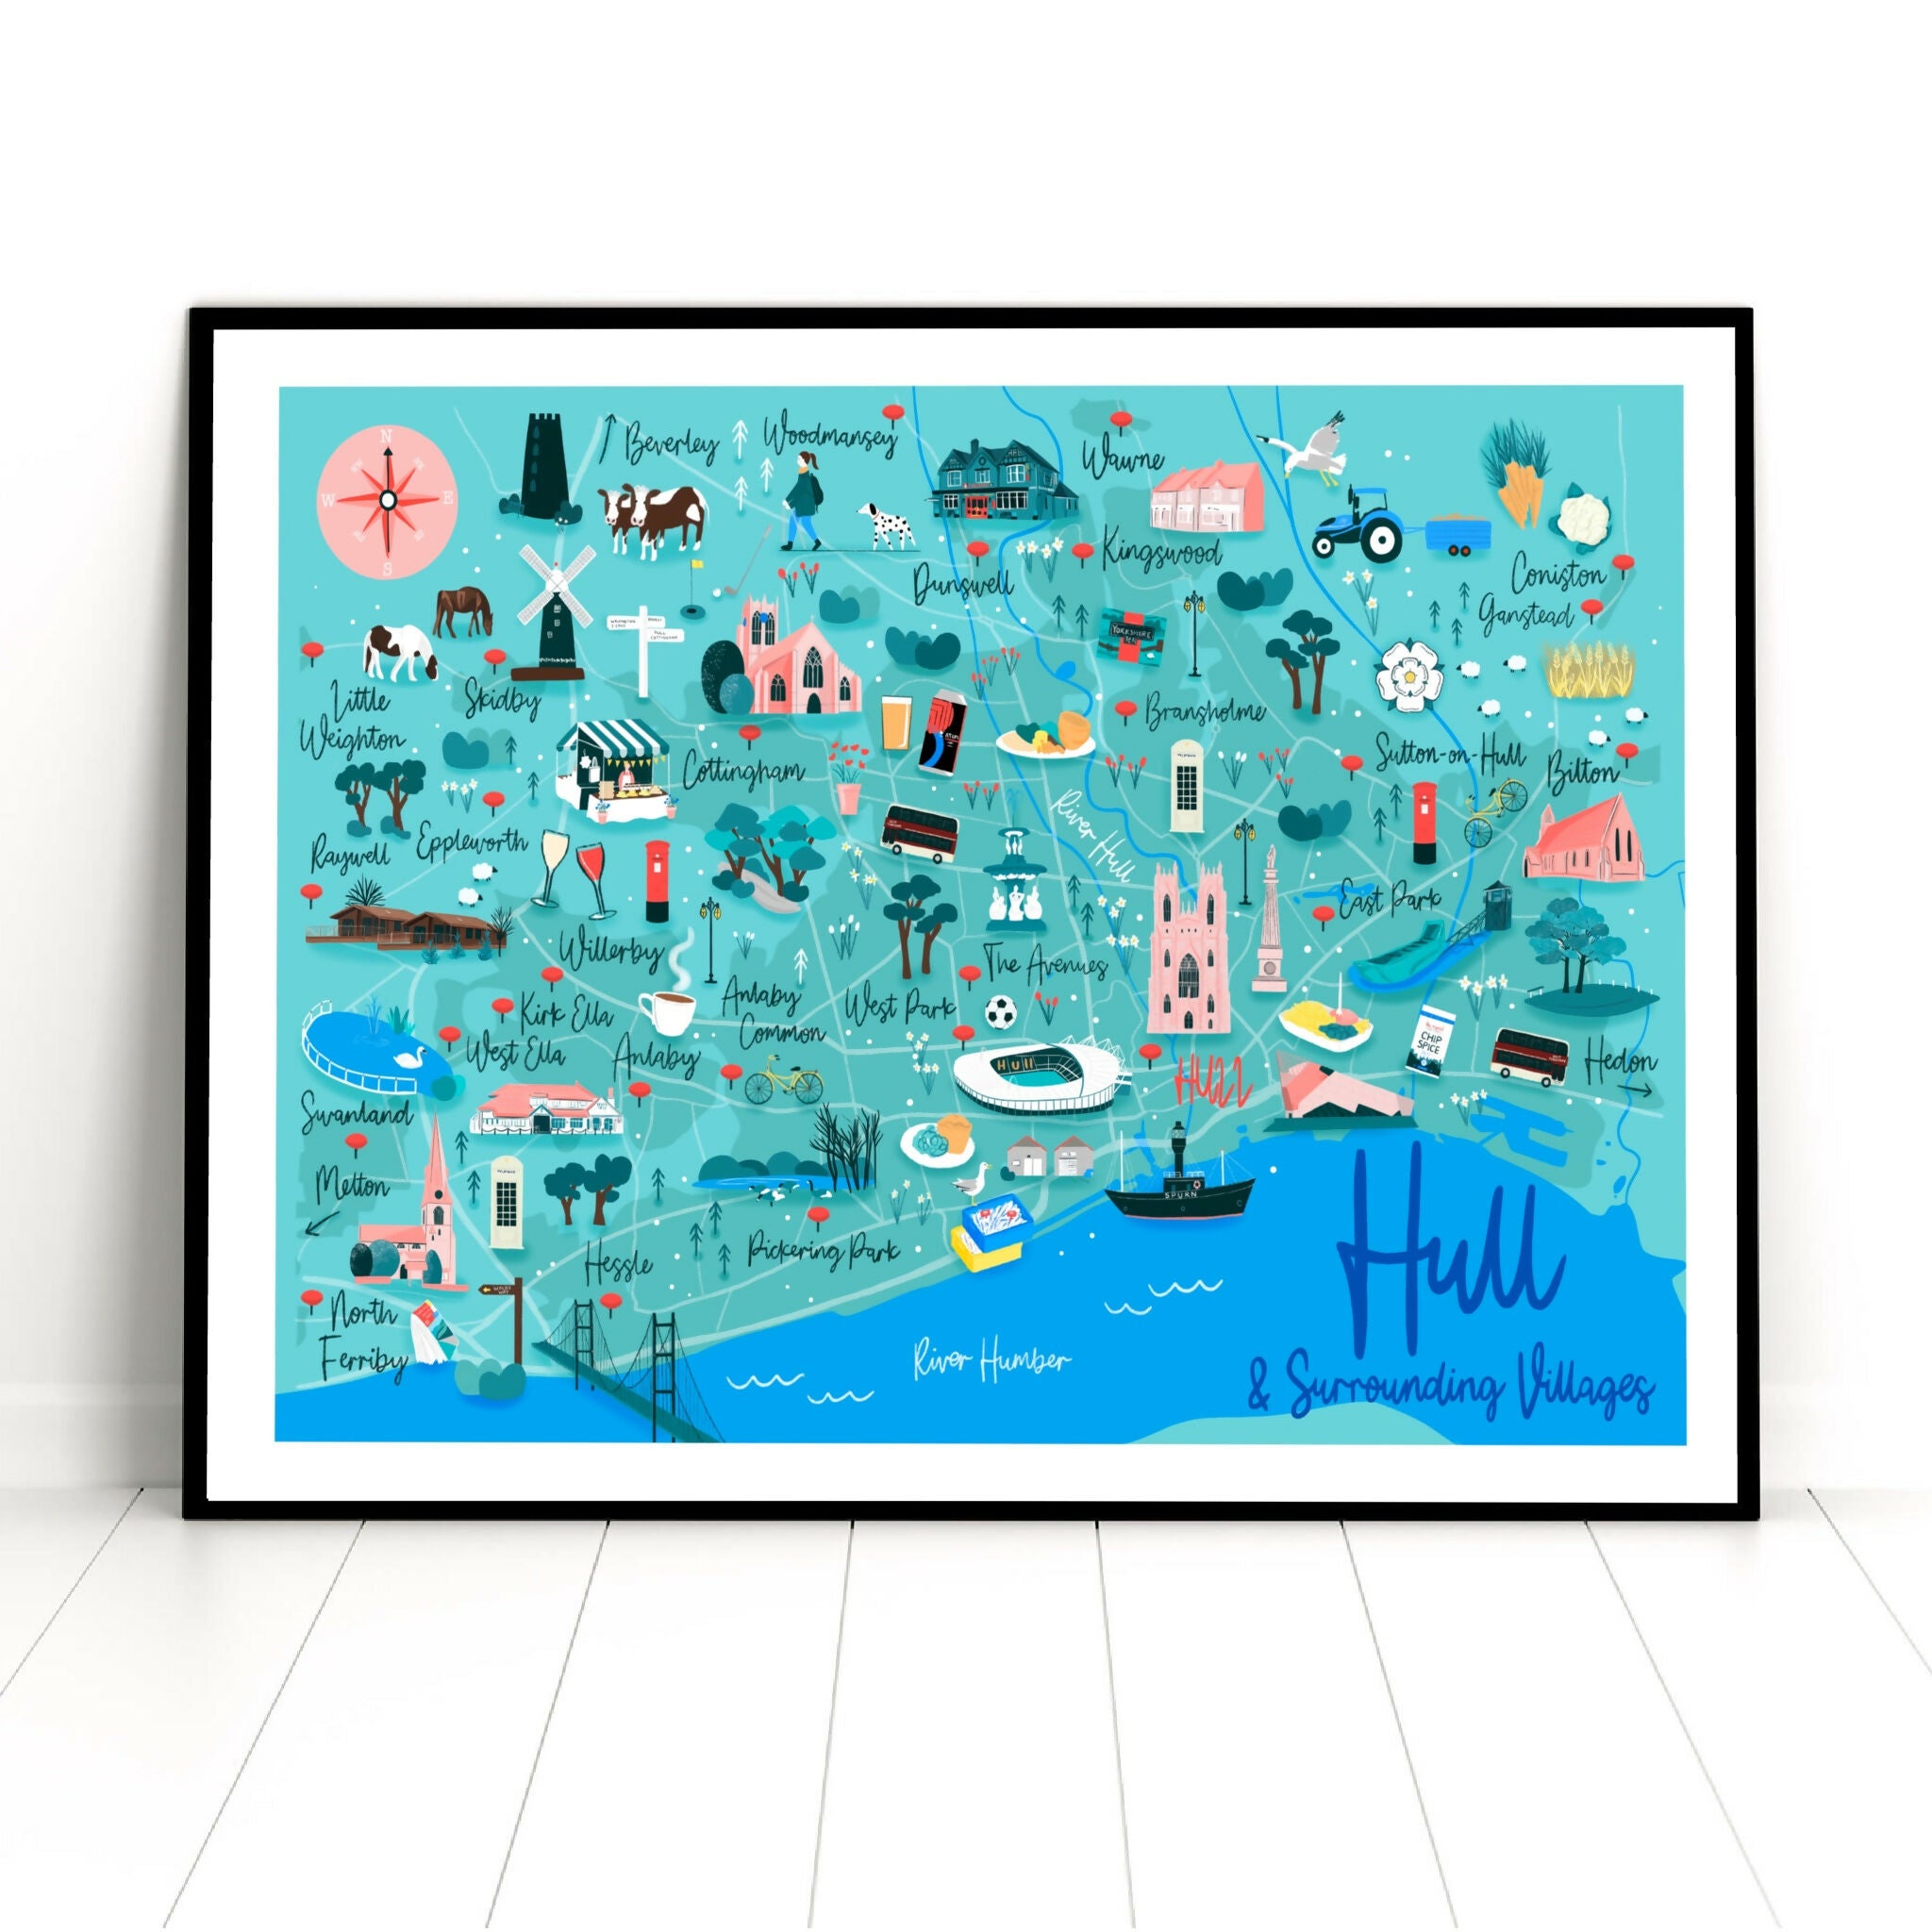 Hull and Surrounding Villages Art Print